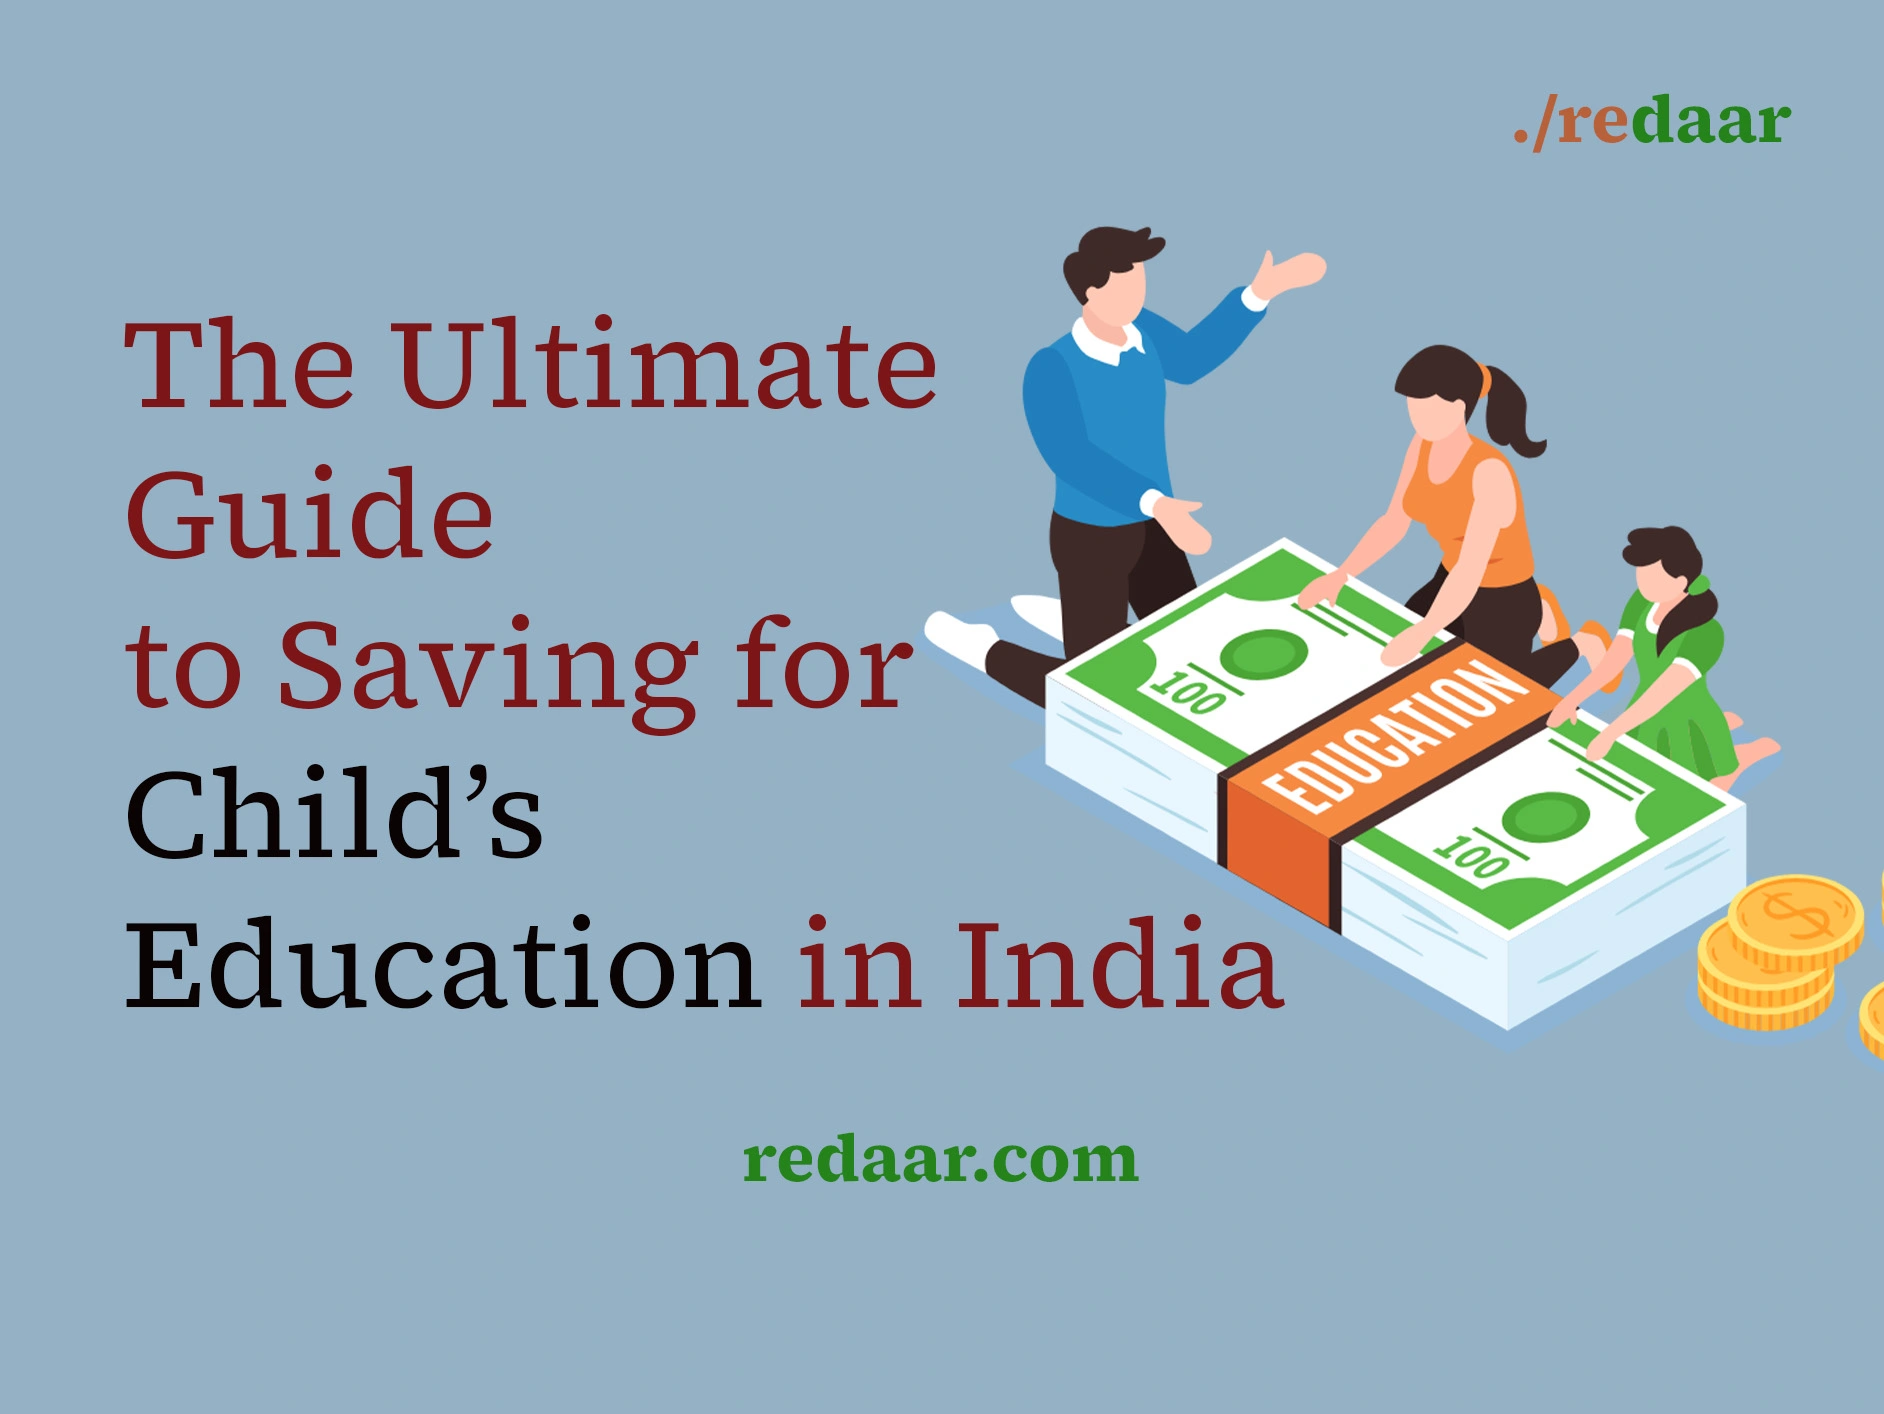 The Ultimate Guide to Save for Child’s Education in India